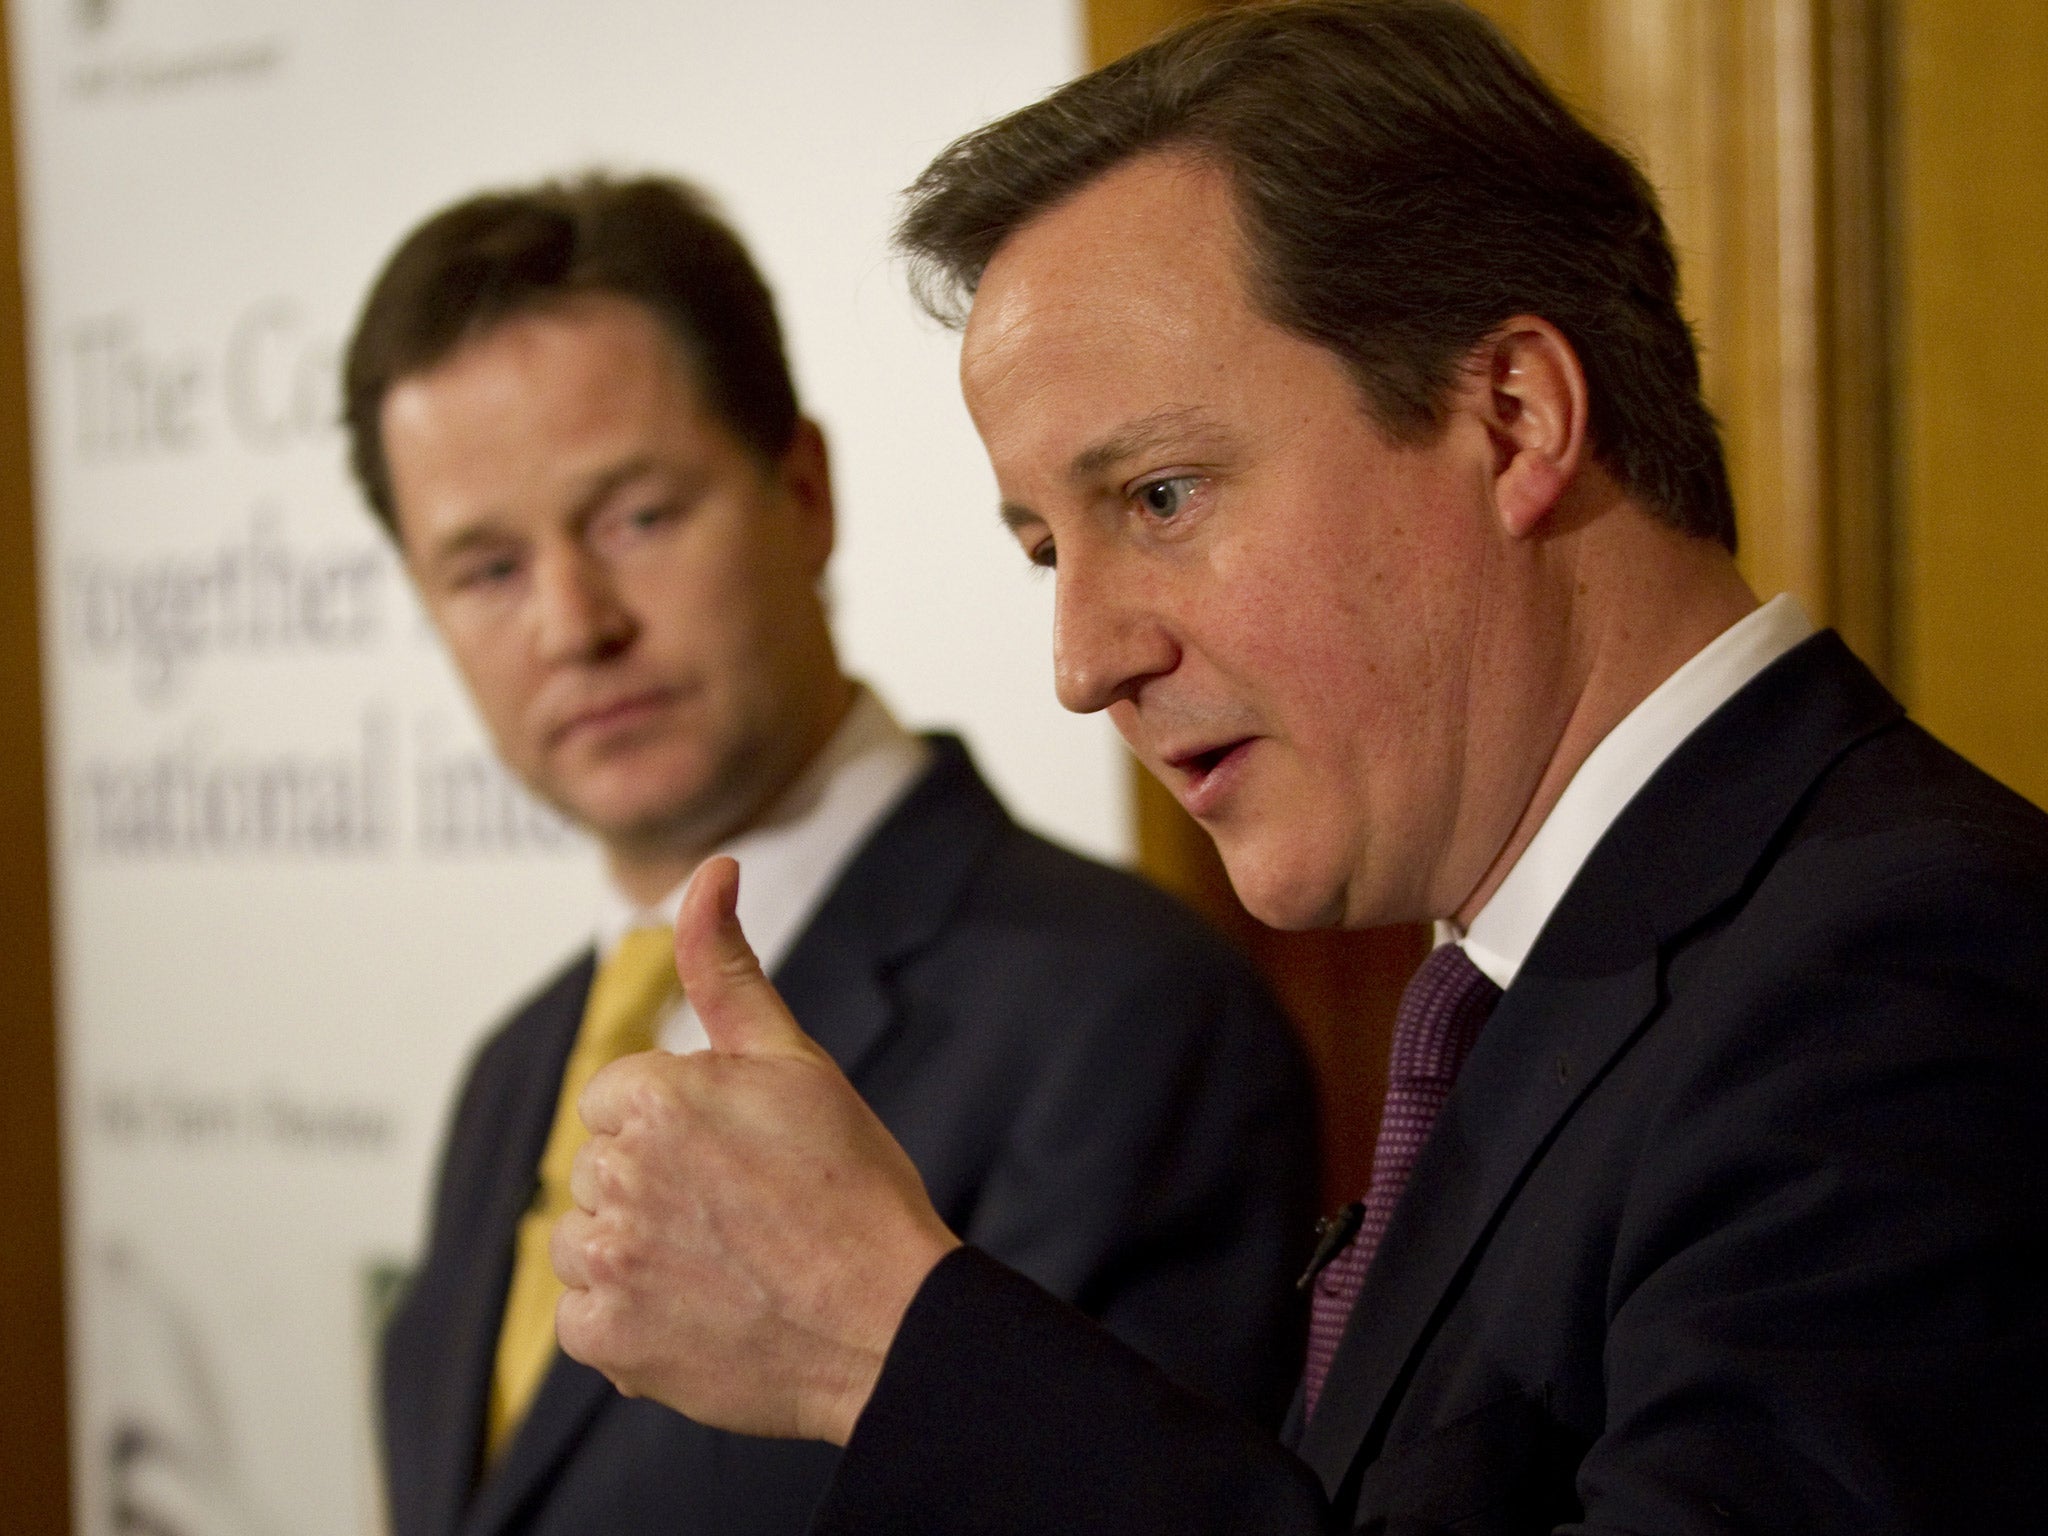 A rare shot of Clegg taking a stand on Cameron's right